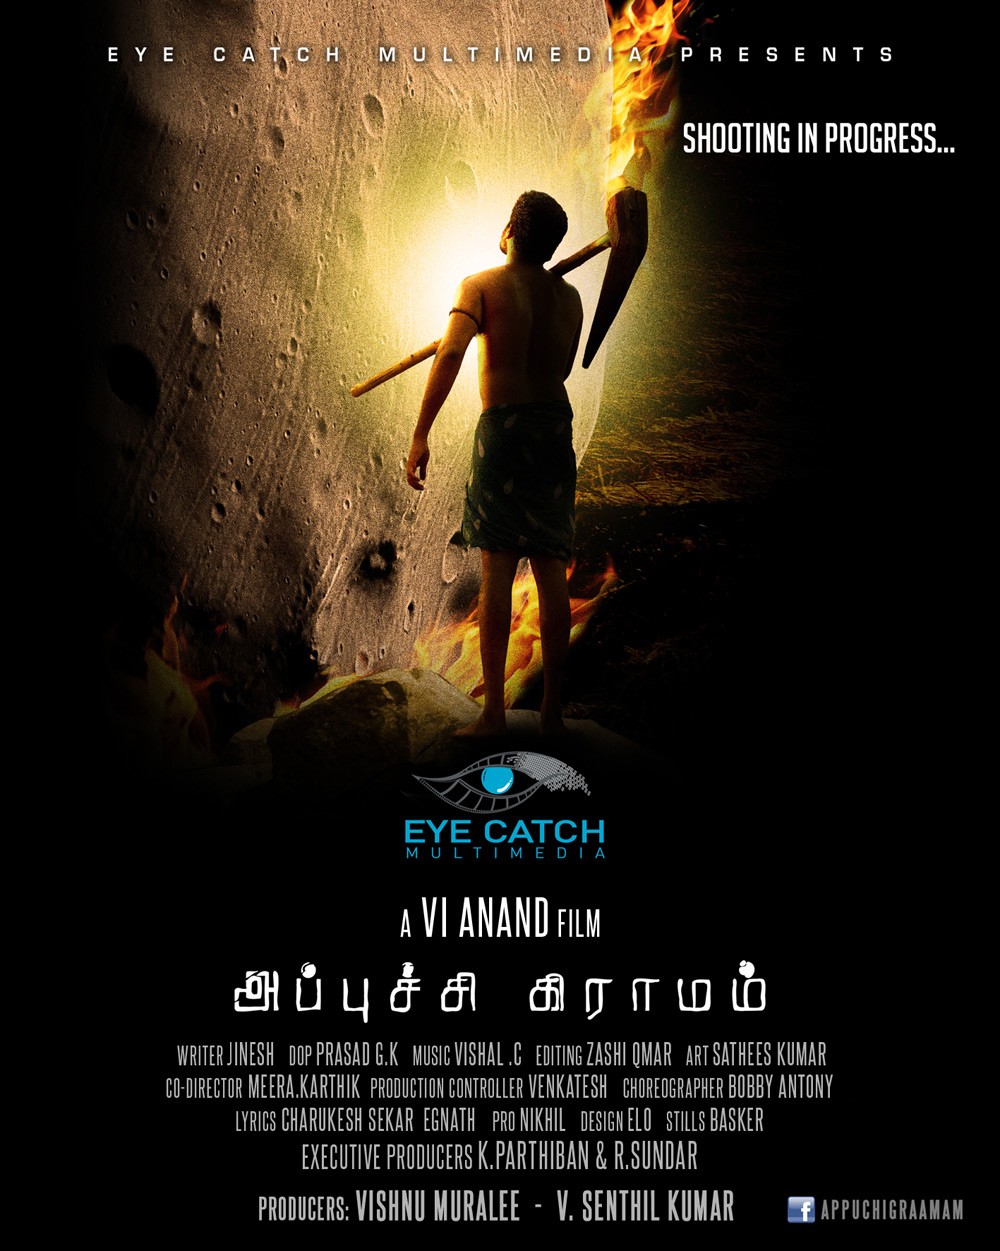 Extra Large Movie Poster Image for Appuchi Graamam (#2 of 4)